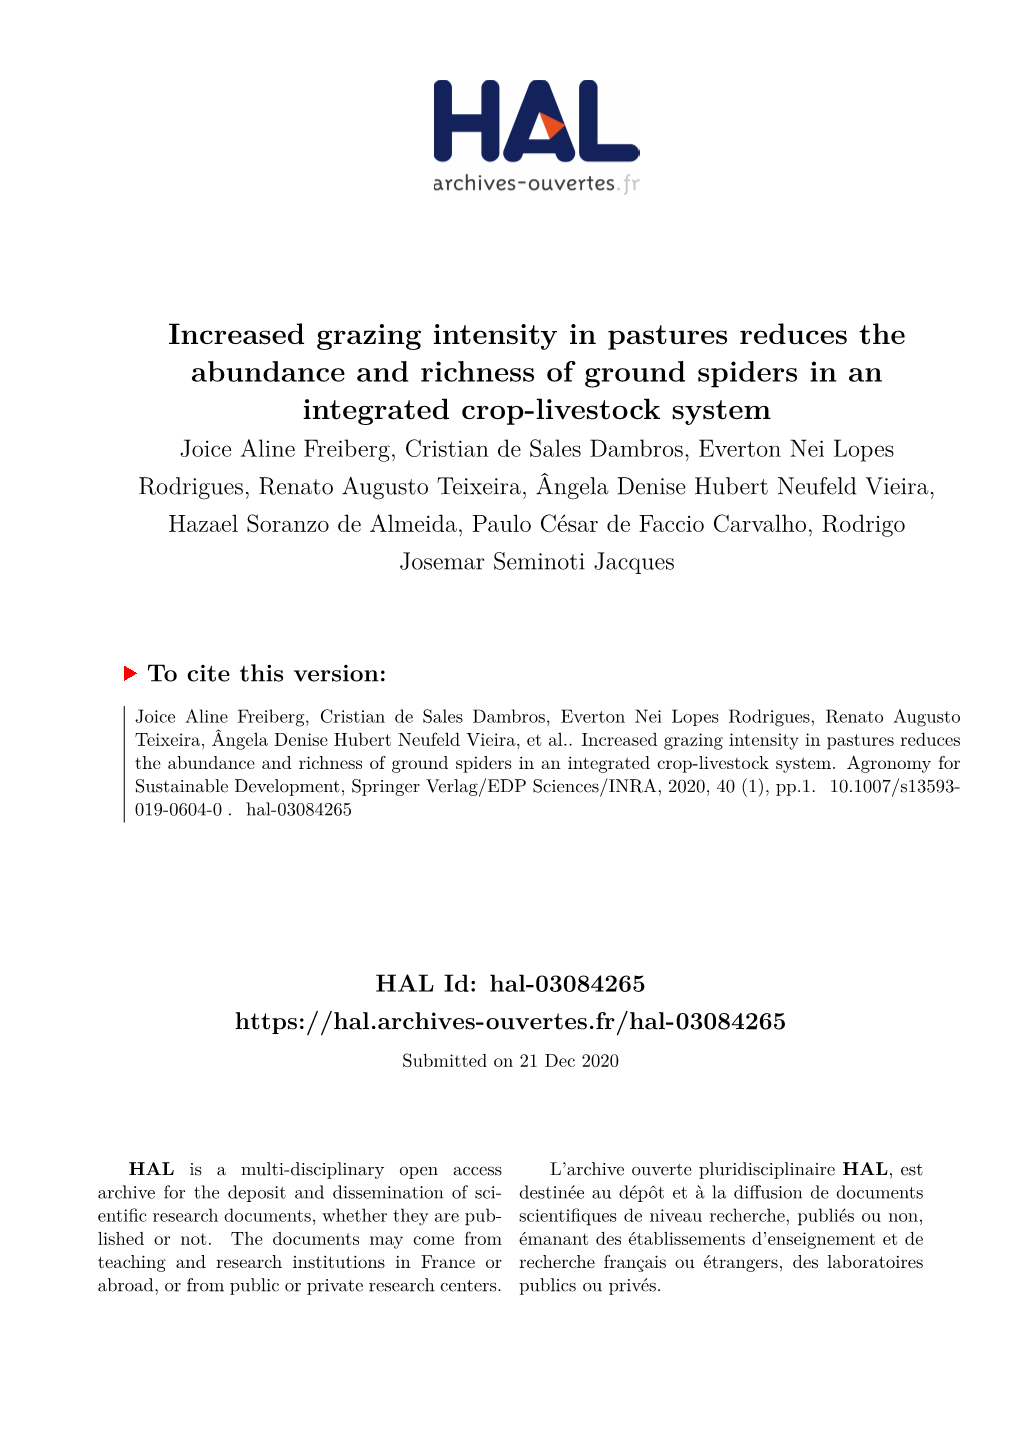 Increased Grazing Intensity in Pastures Reduces the Abundance And